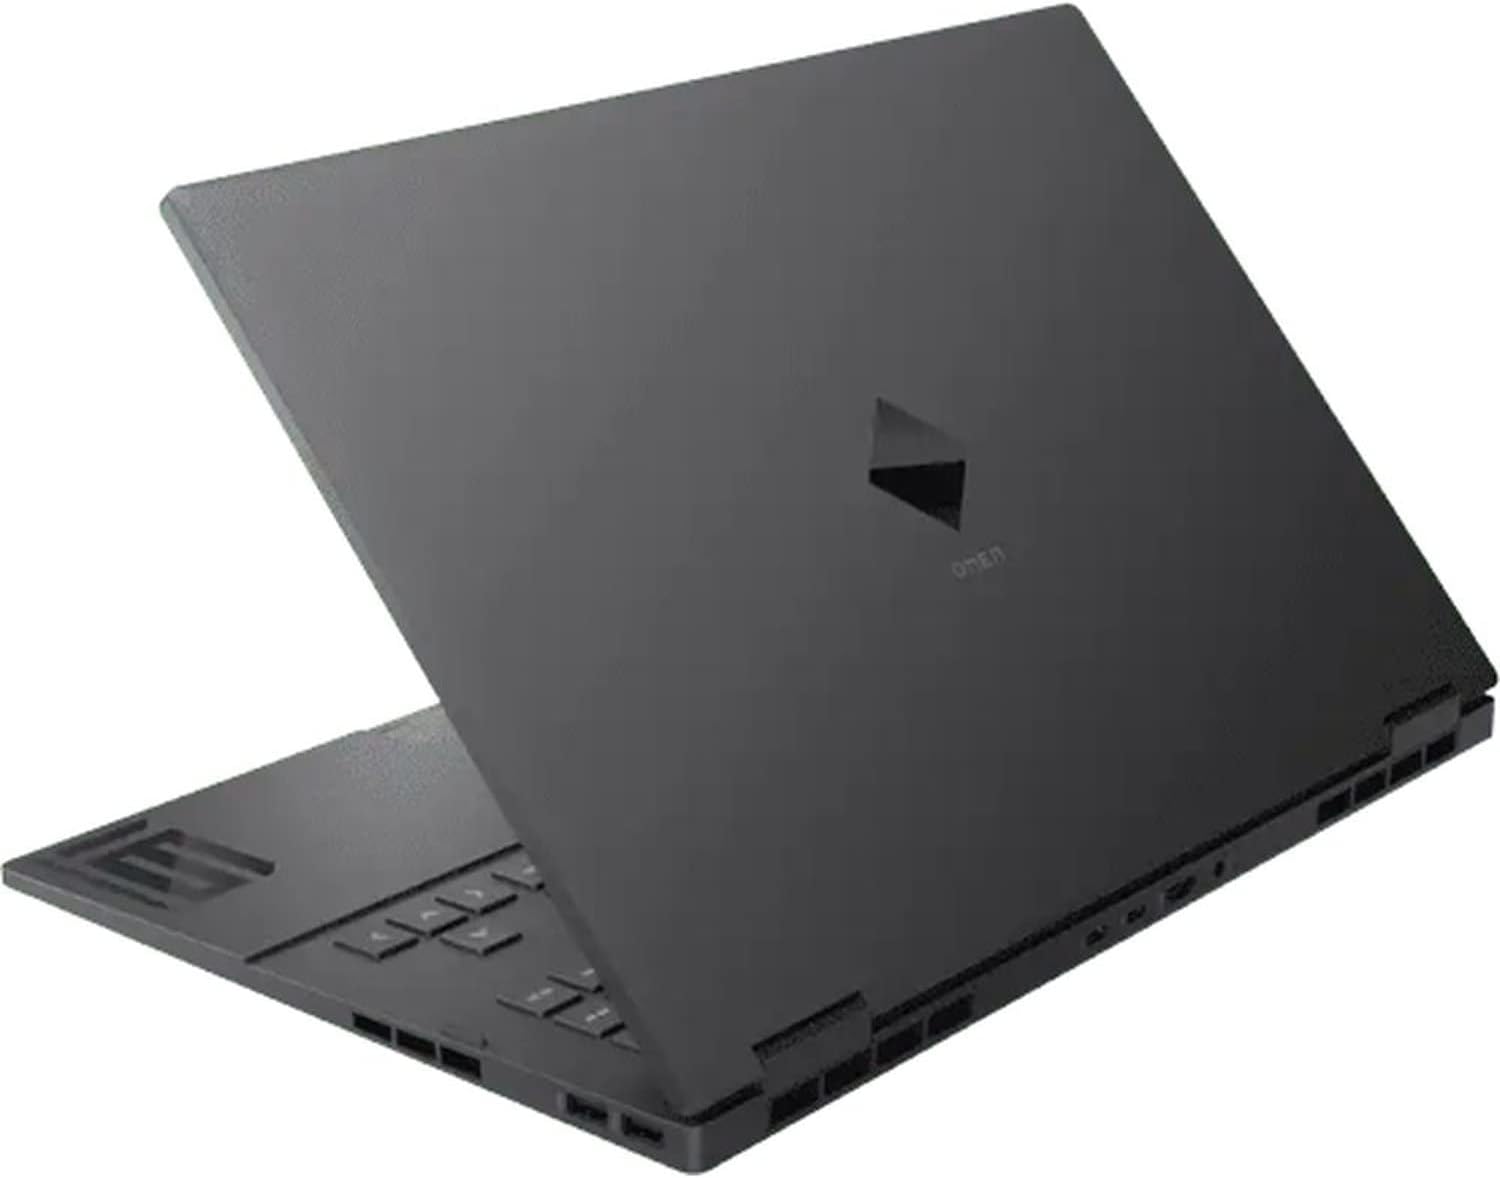 HP OMEN Gaming Laptop 16.1-inch Core i7-12700 32GB RAM 1TB SSD NVIDIA GeForce RTX 3070: High-performance laptop for gaming enthusiasts with top-tier specs. 0197192149751